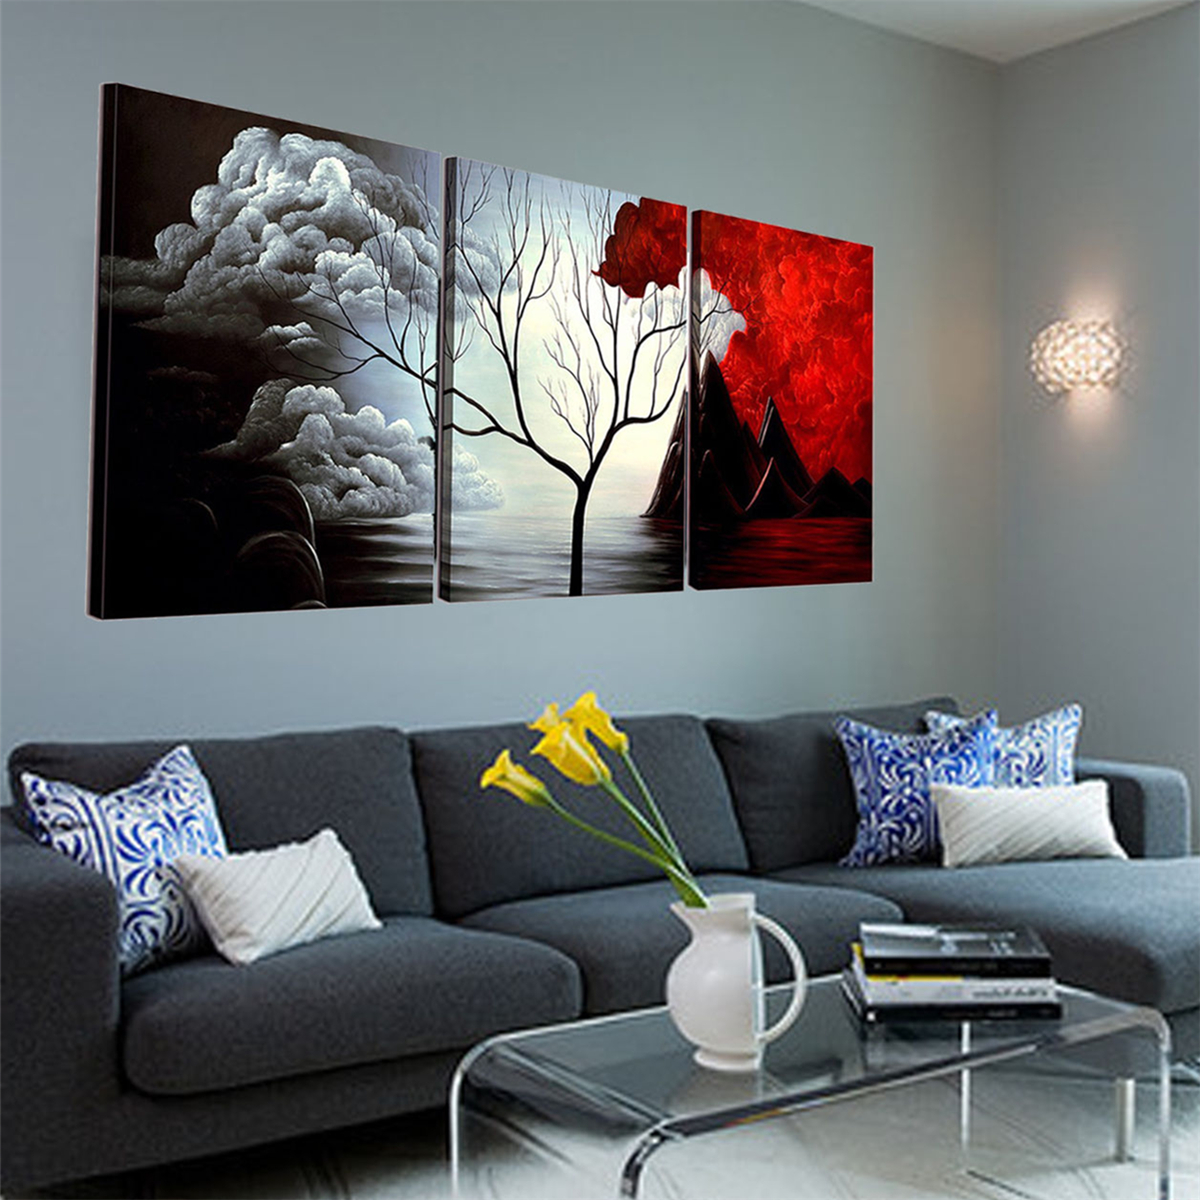 3-PCS-Tree-Modern-Abstract-Landscape-Canvas-Painting-Print-Picture-Home-Art-No-Frame-1127183